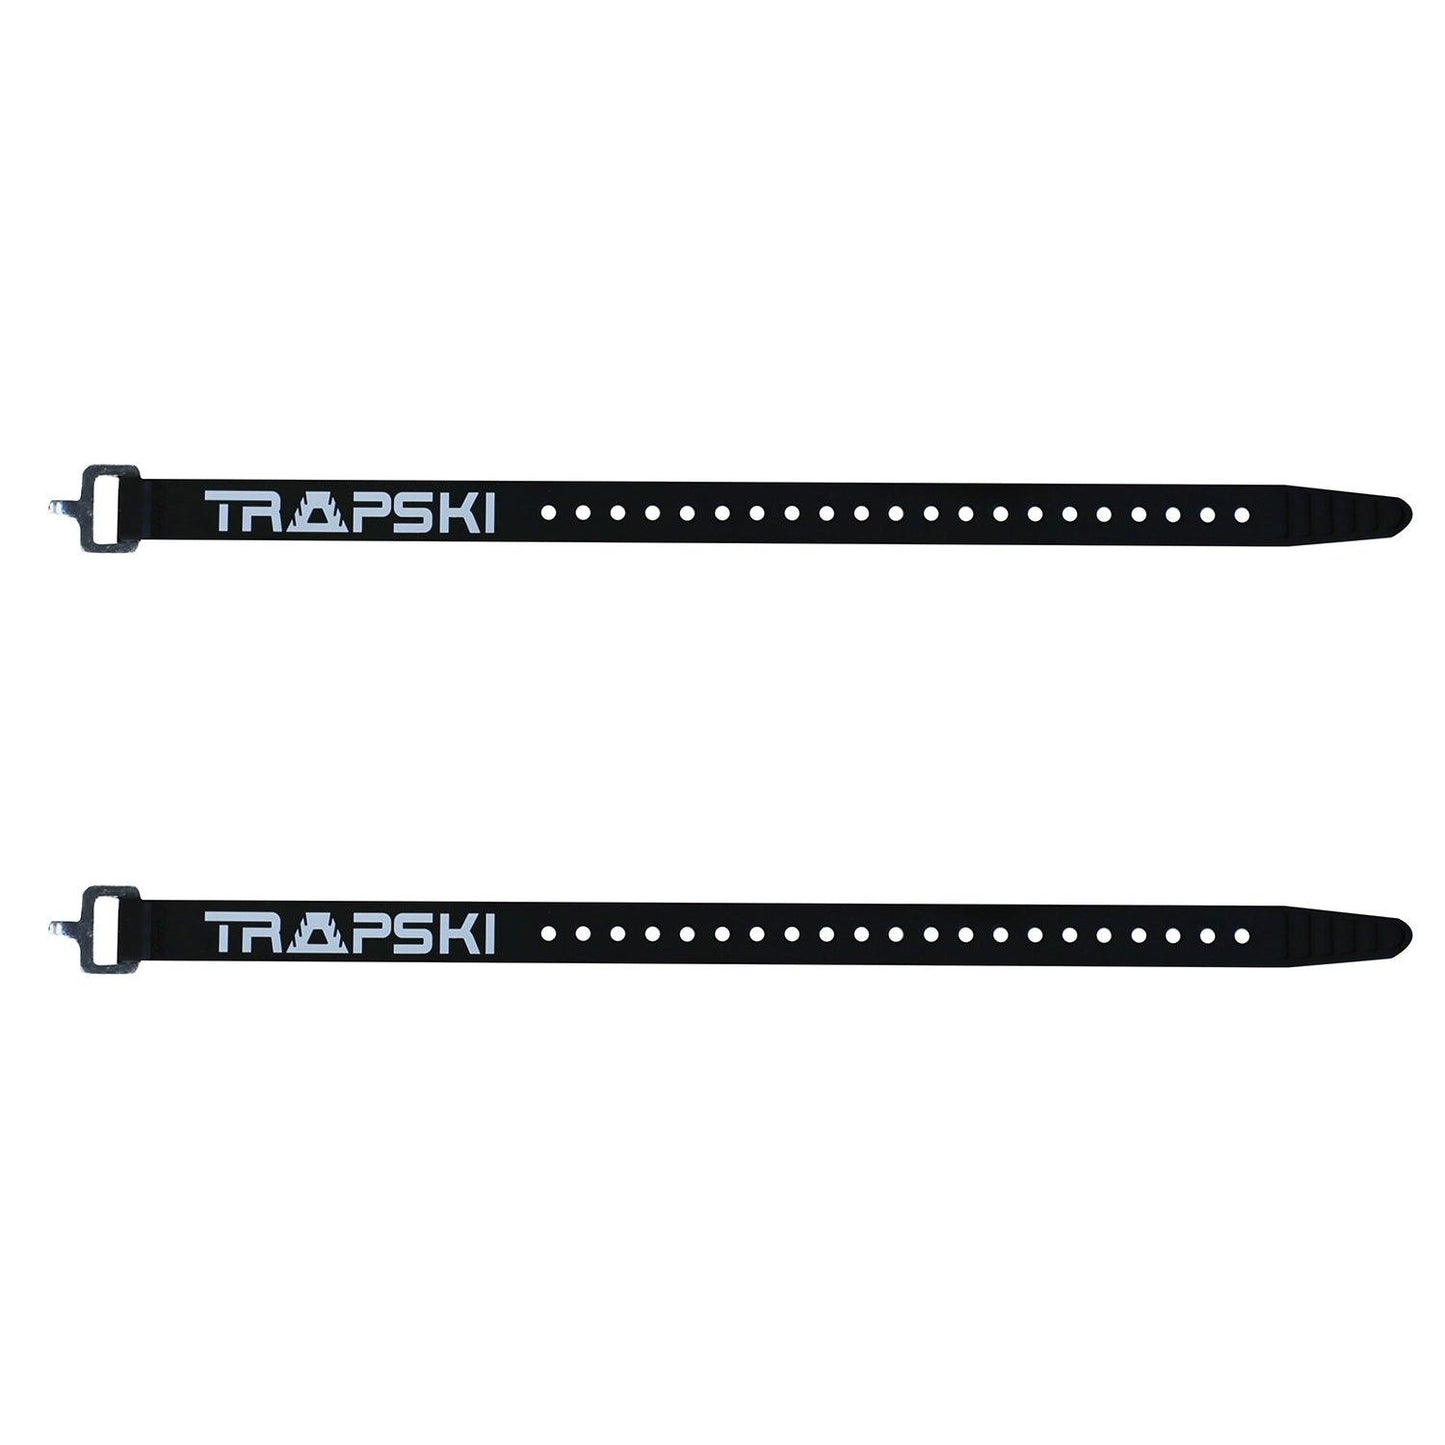 TRAPSKI Voile 15 inch Aluminum Buckle Tension Strap | UV-Resistant | Multi-Use Strap | 3 Year Warranty | USA Veteran Owned Business